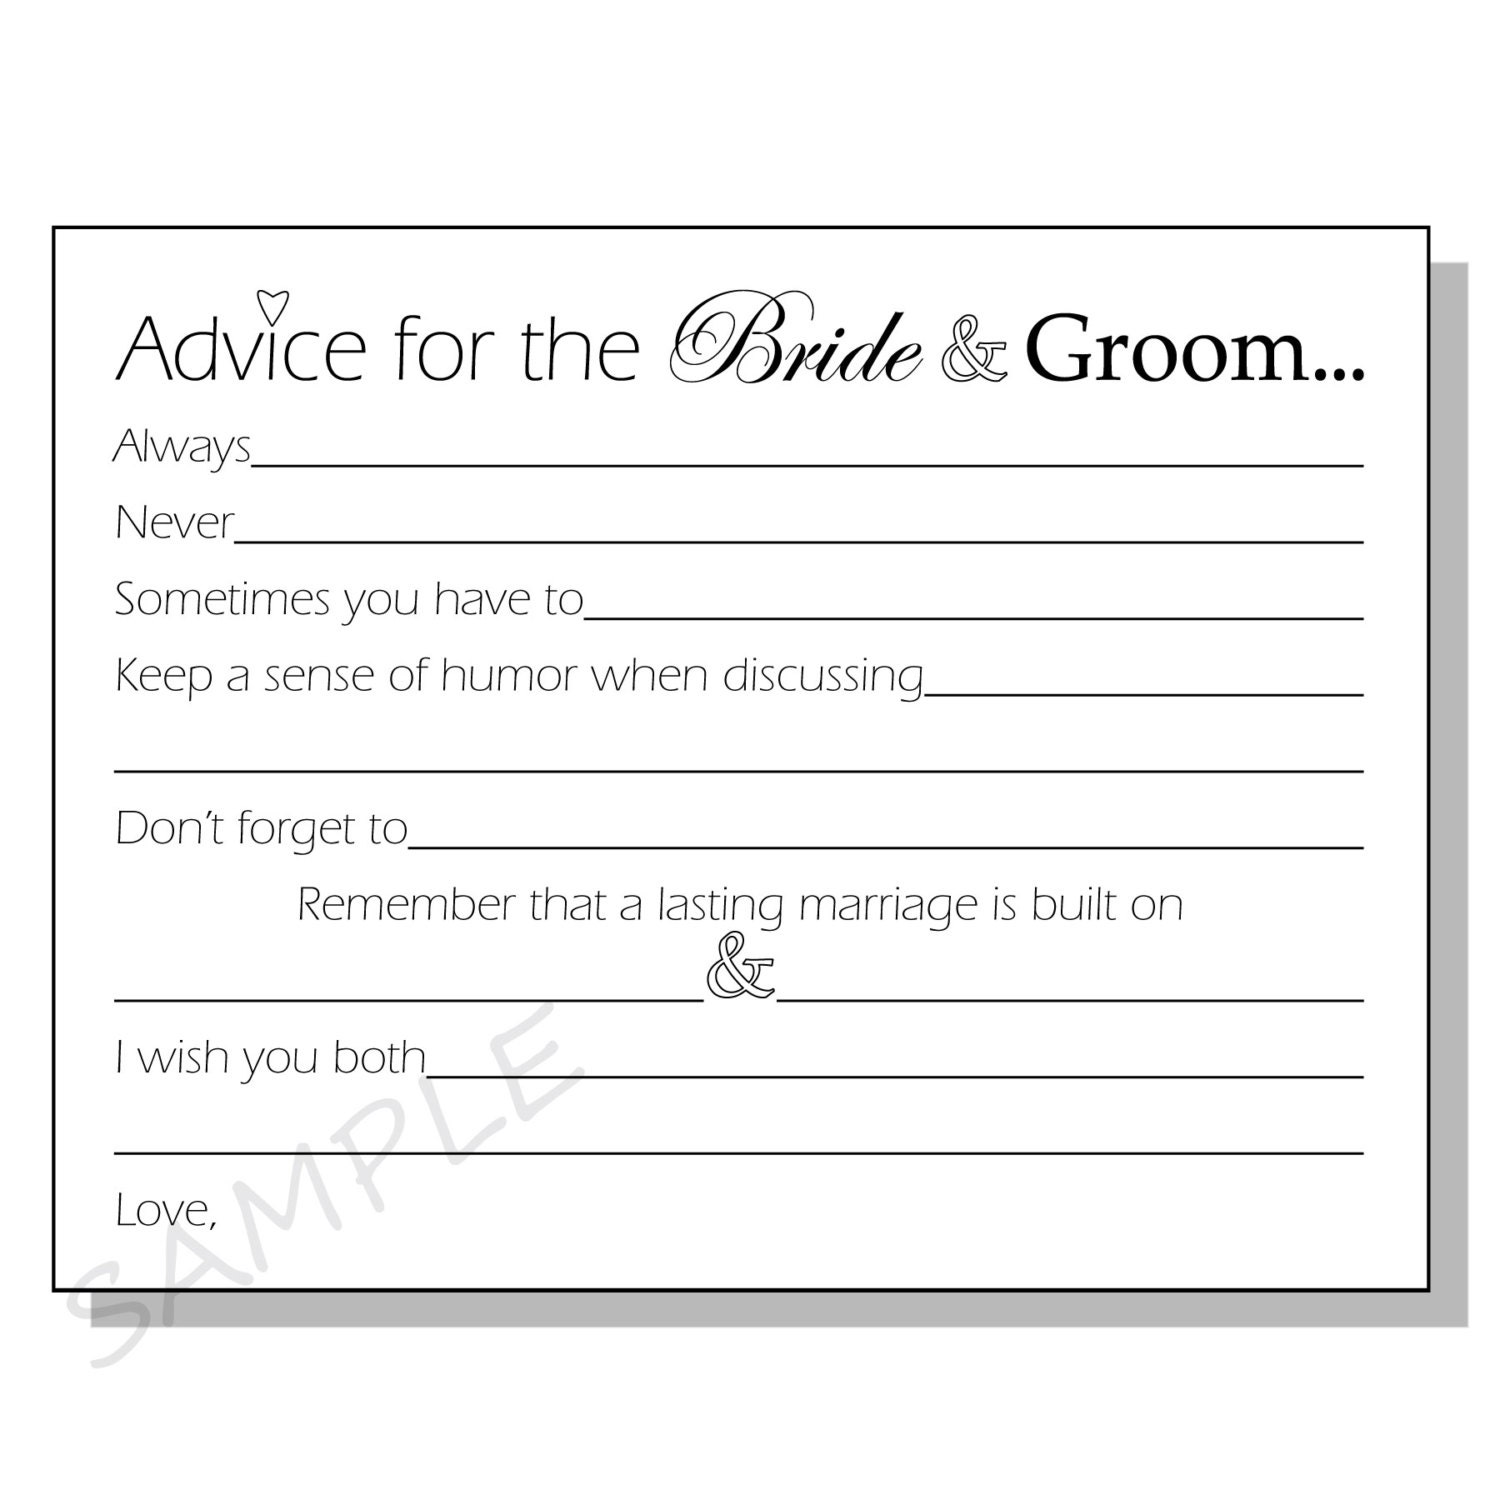 diy-advice-for-the-bride-groom-printable-cards-for-a-bridal-etsy